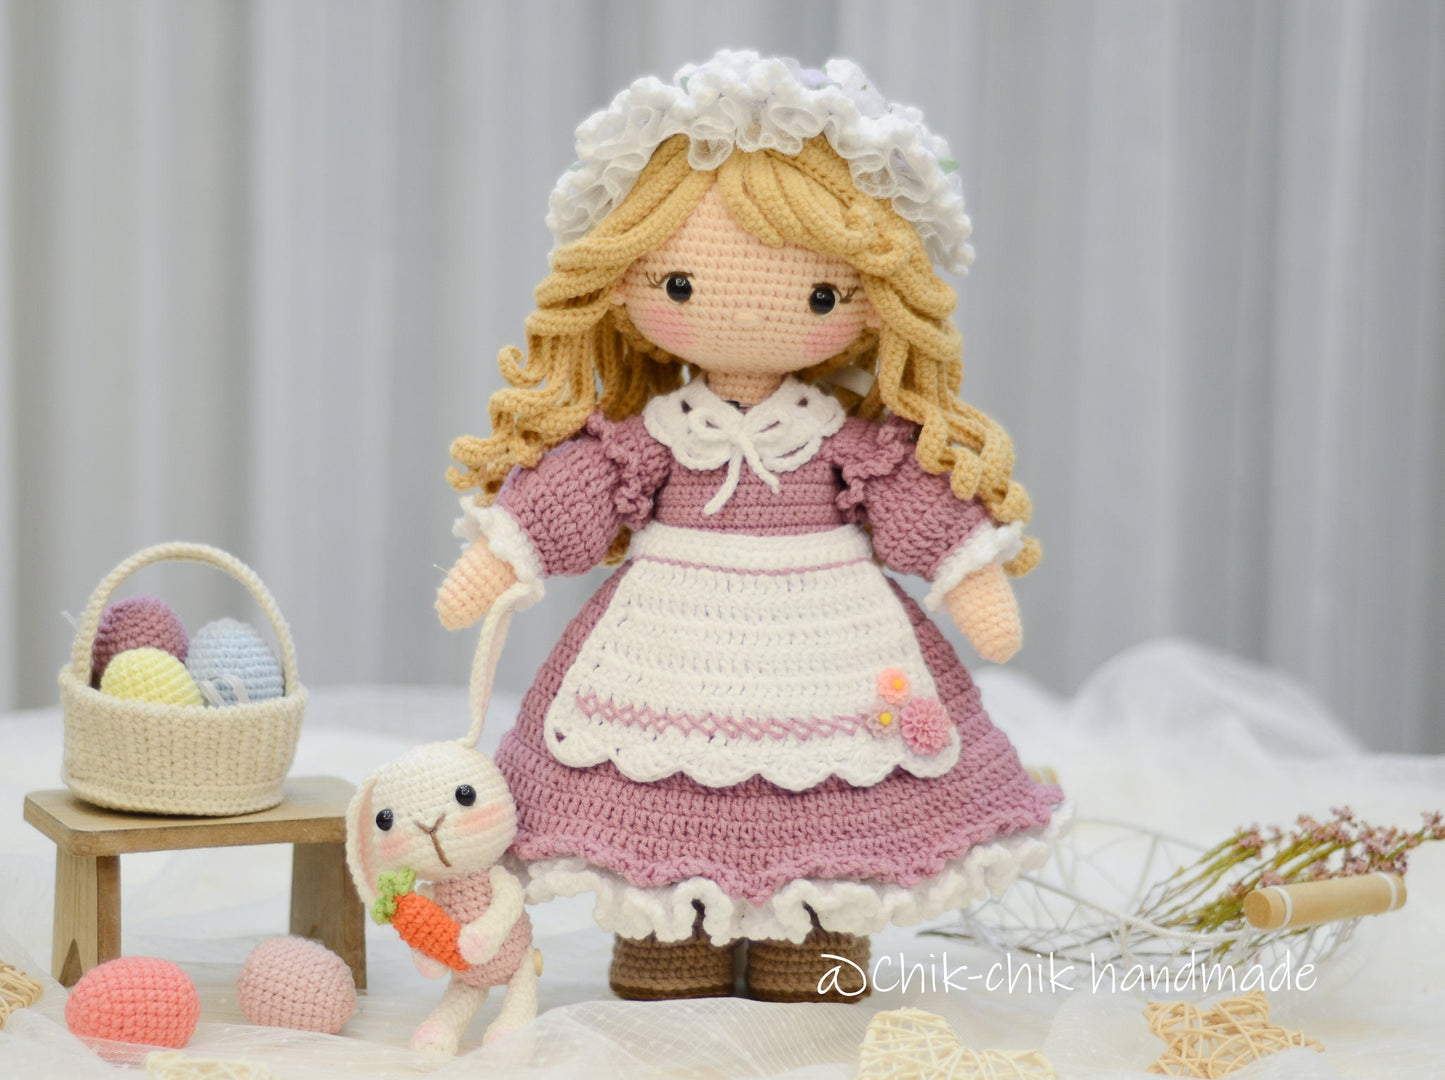 Crochet Doll Pattern Amigurumi Doll Pattern, Outfit for ROSIE The Maid PDF English, Français